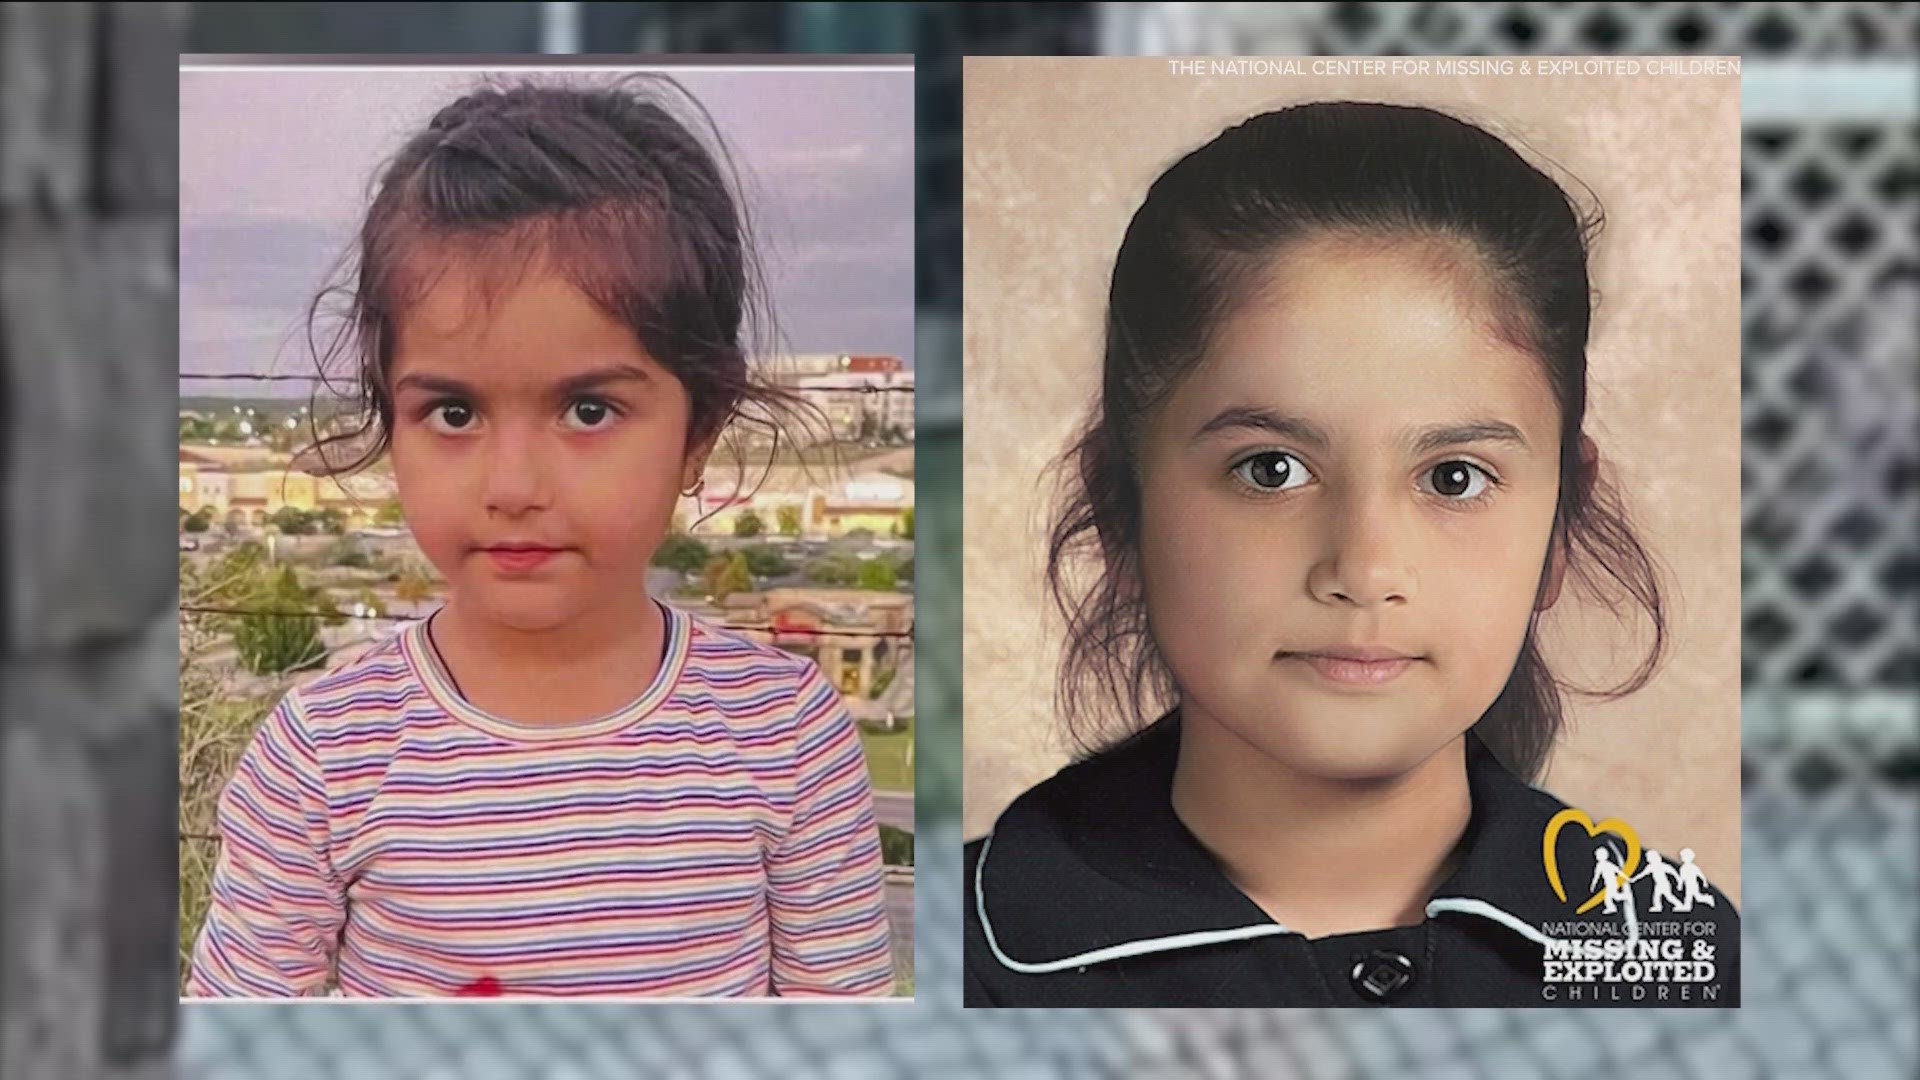 Khil went missing out of San Antonio three years ago when she was just three years old.